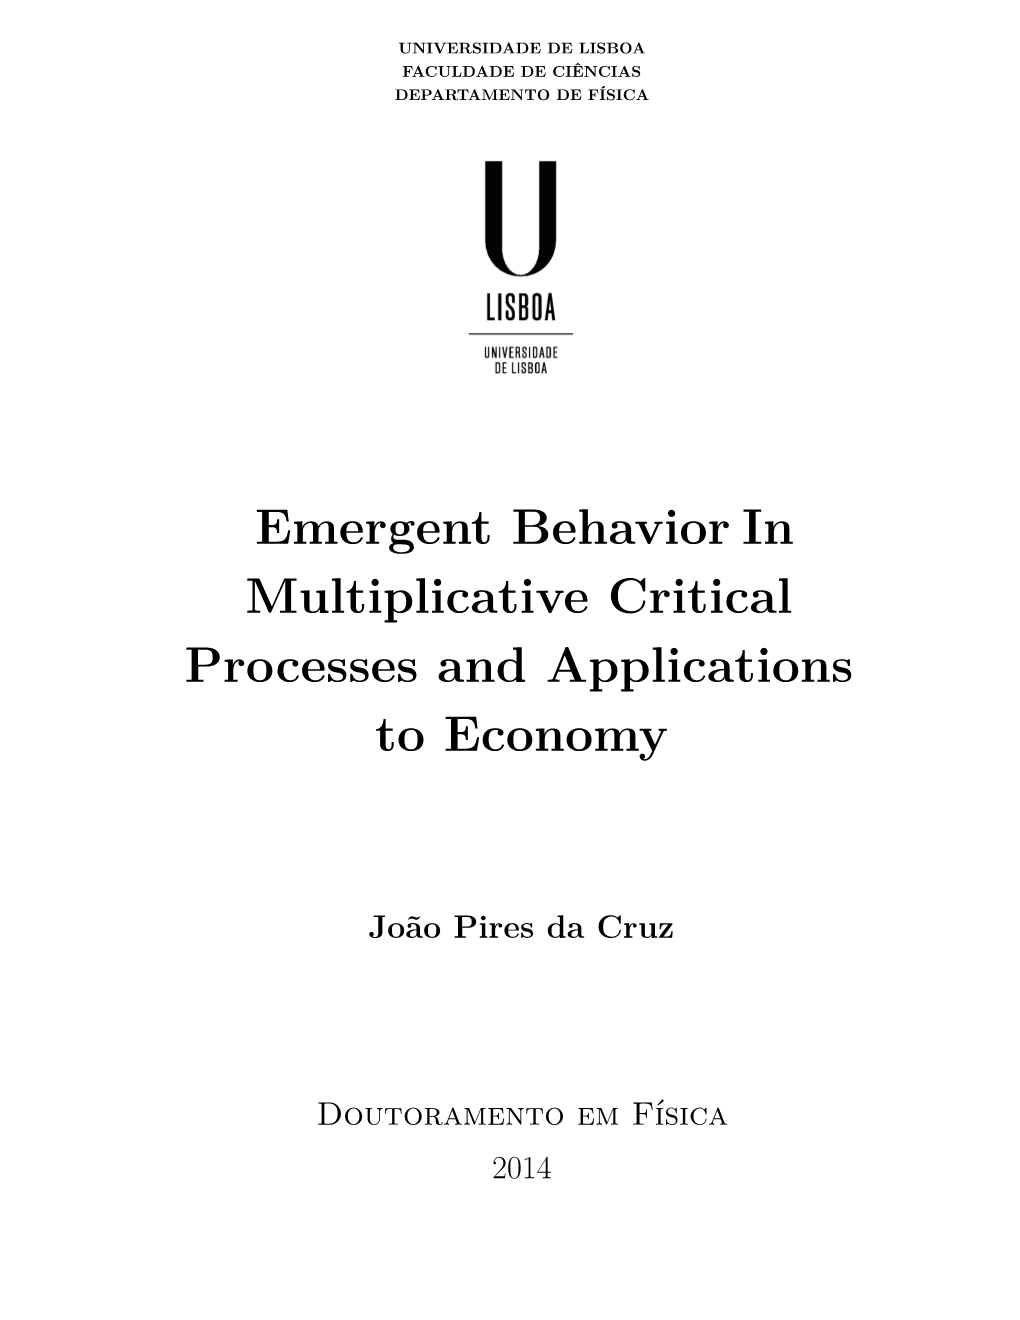 Emergent Behavior in Multiplicative Critical Processes and Applications to Economy